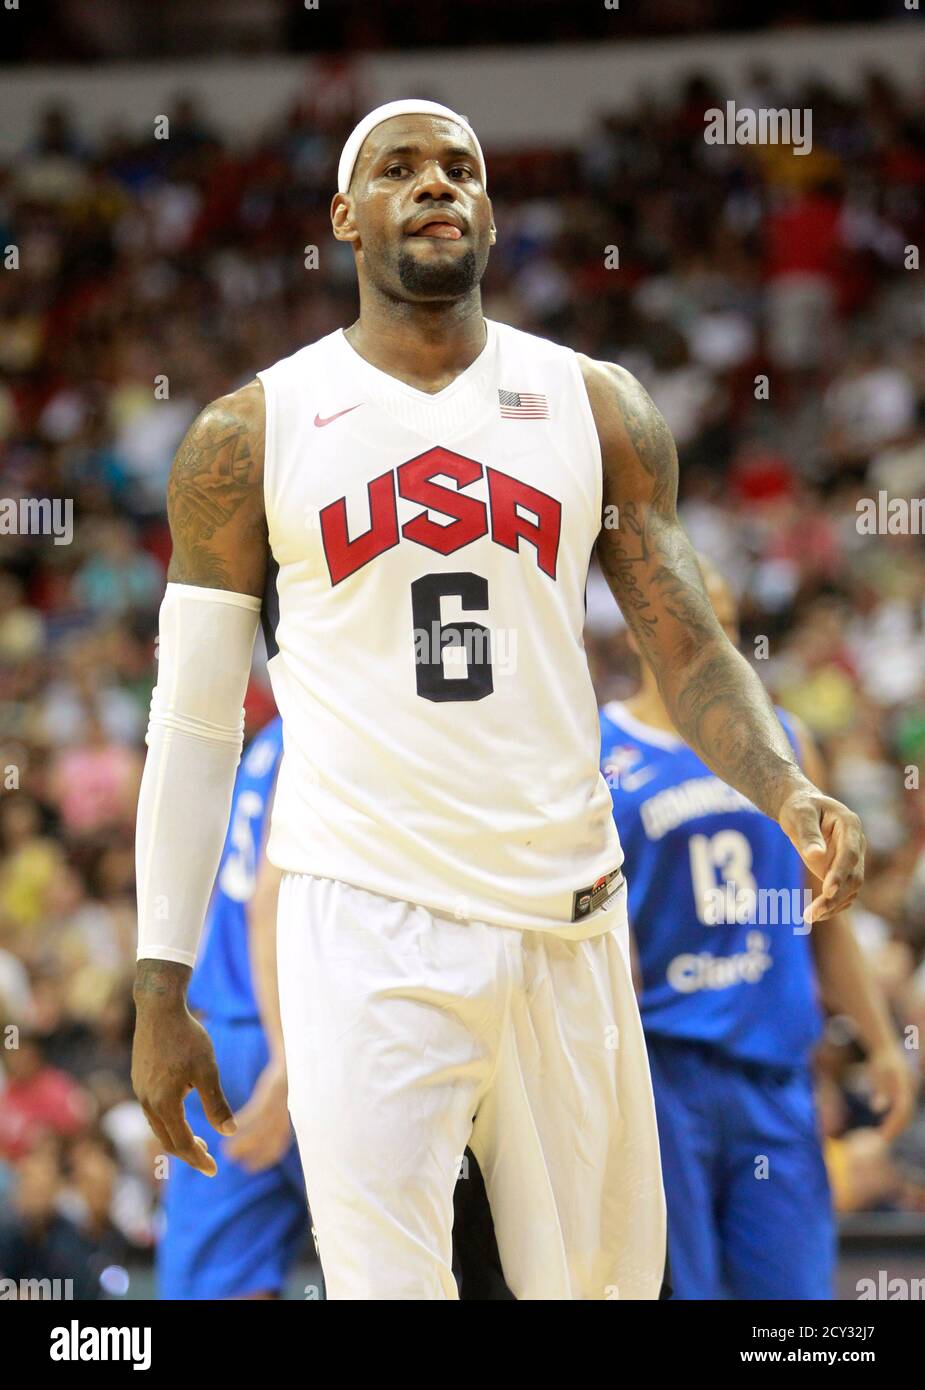 Lebron James Of The U S 12 Olympic Men S Basketball Team Walks On The Court During An Exhibition Game Against The Dominican Republic At The Thomas Mack Center In Las Vegas Nevada